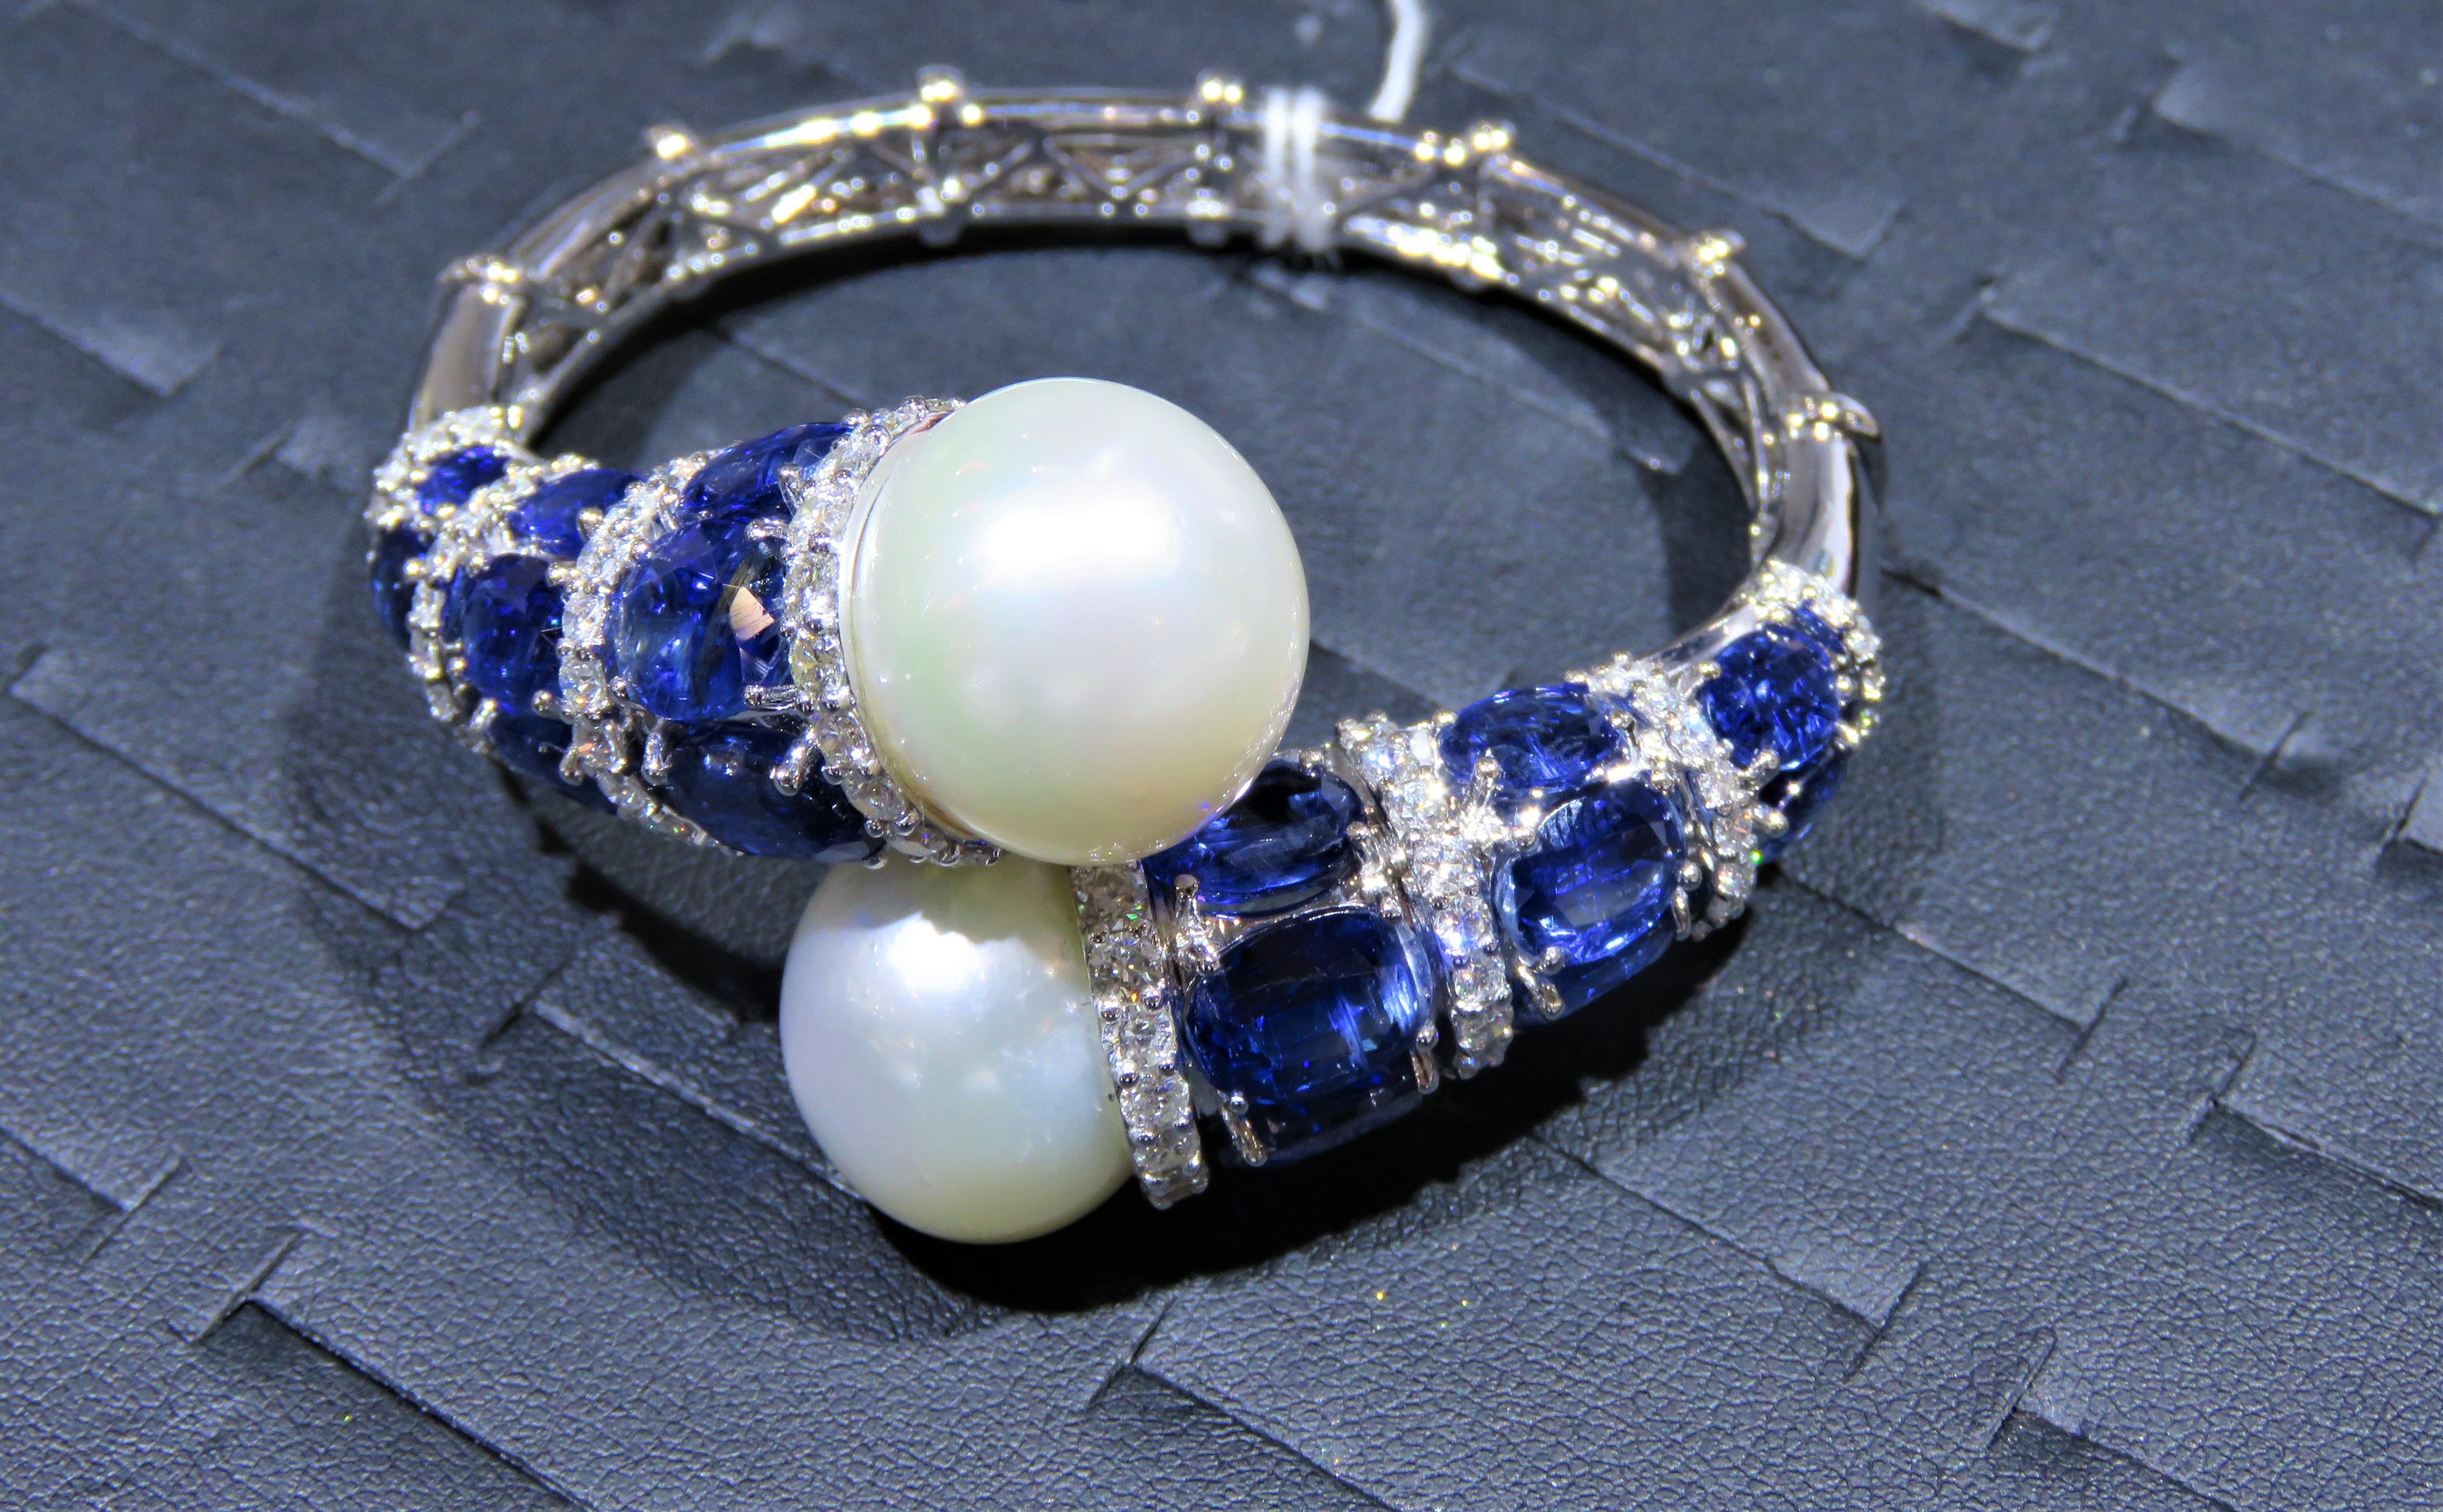 The Following Item we are offering is this Extremely Rare Beautiful 18KT Gold Fine Rare Large South Sea Pearl Crossover Fancy Blue Kyanite Diamond Bangle Bracelet. This Magnificent Bangle is comprised of Rare Fine Large South Sea Pearls and Royal